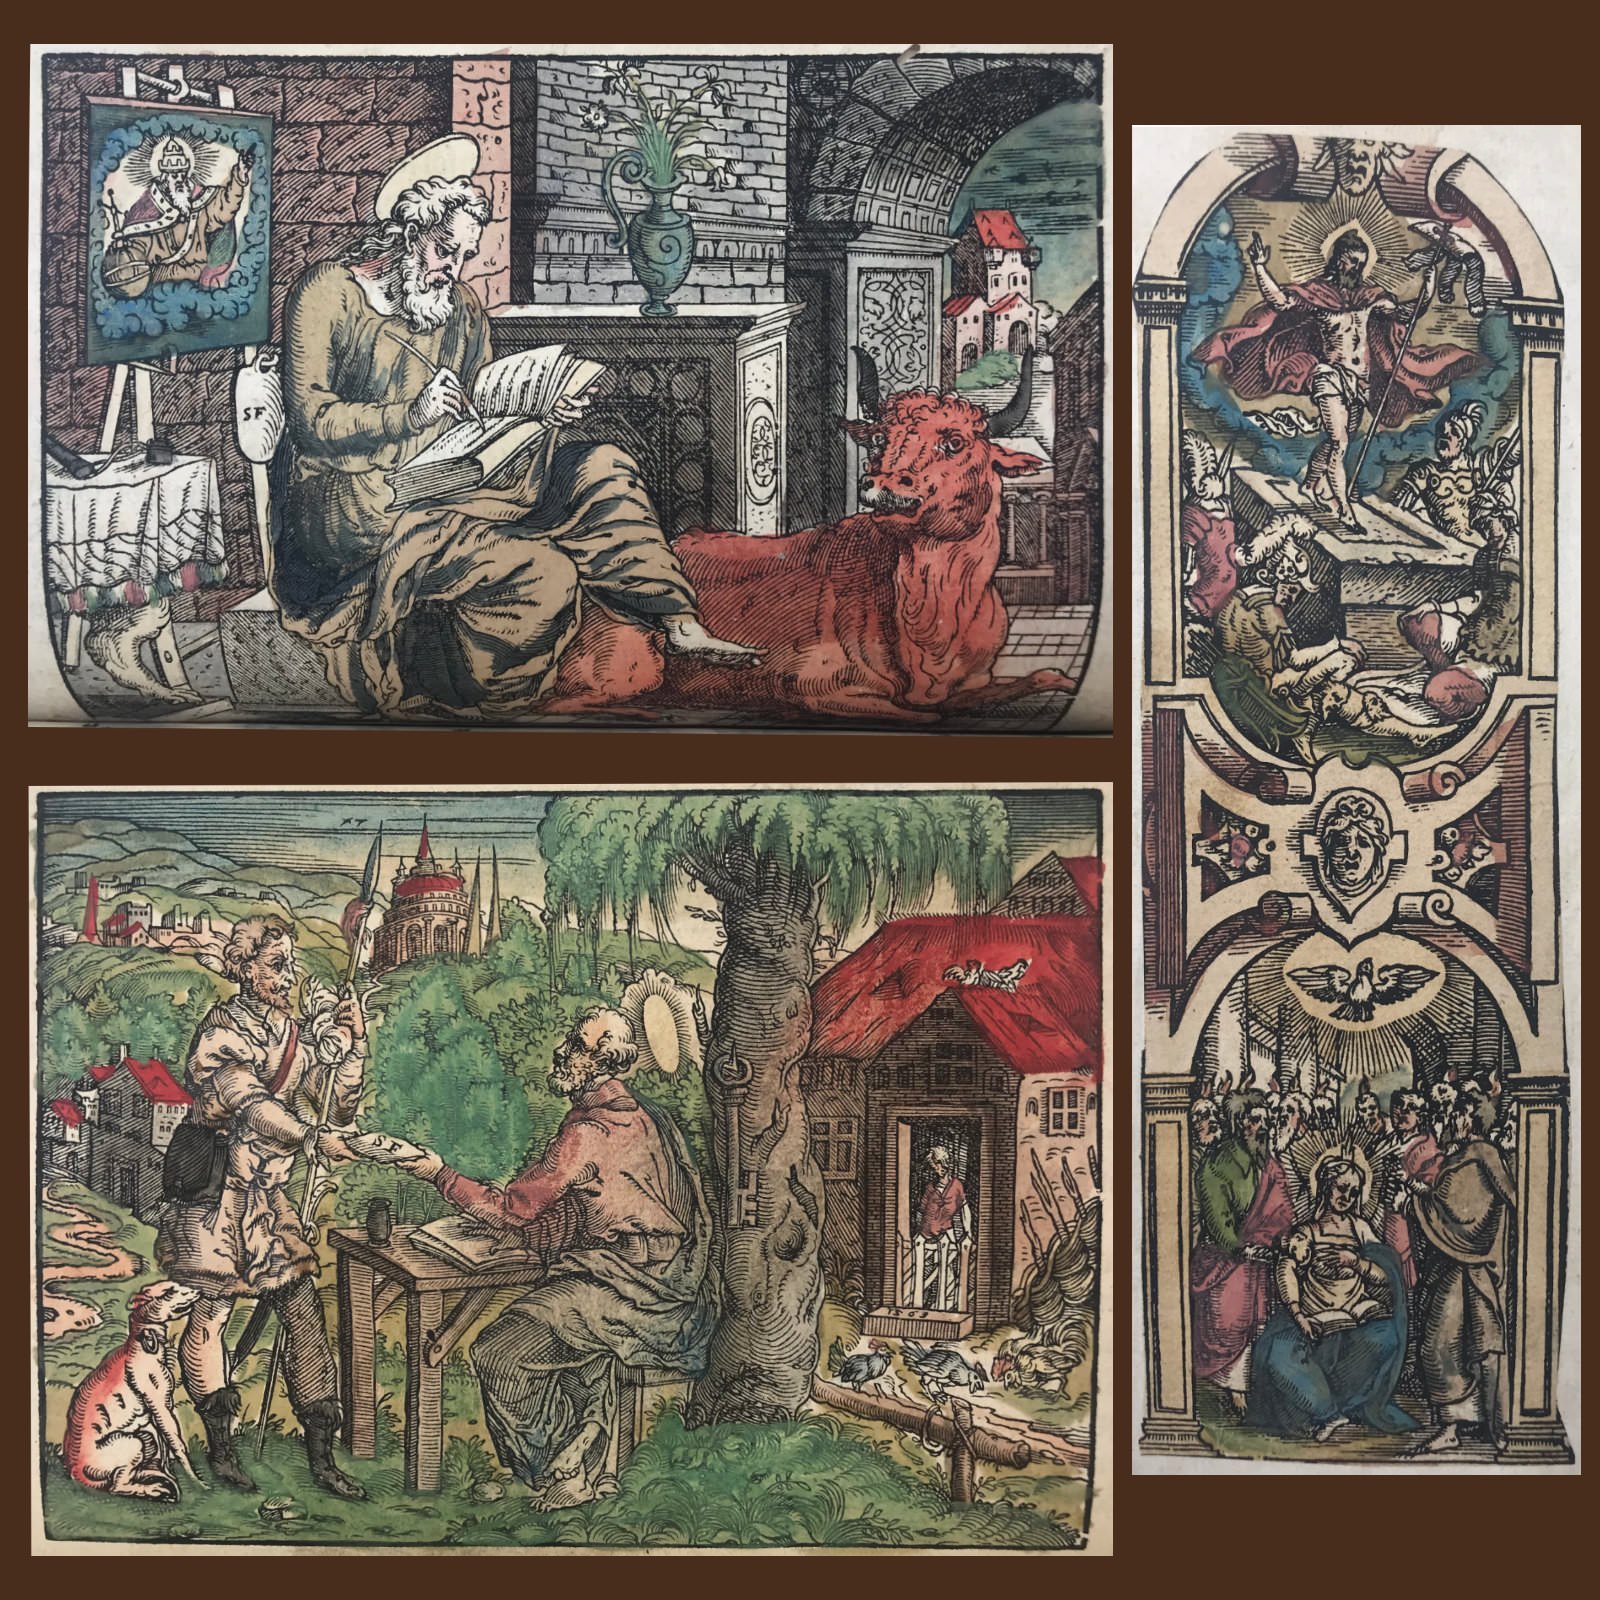  Some illustrations were meticulously hand-colored at the print house or by a subsequent owner. 